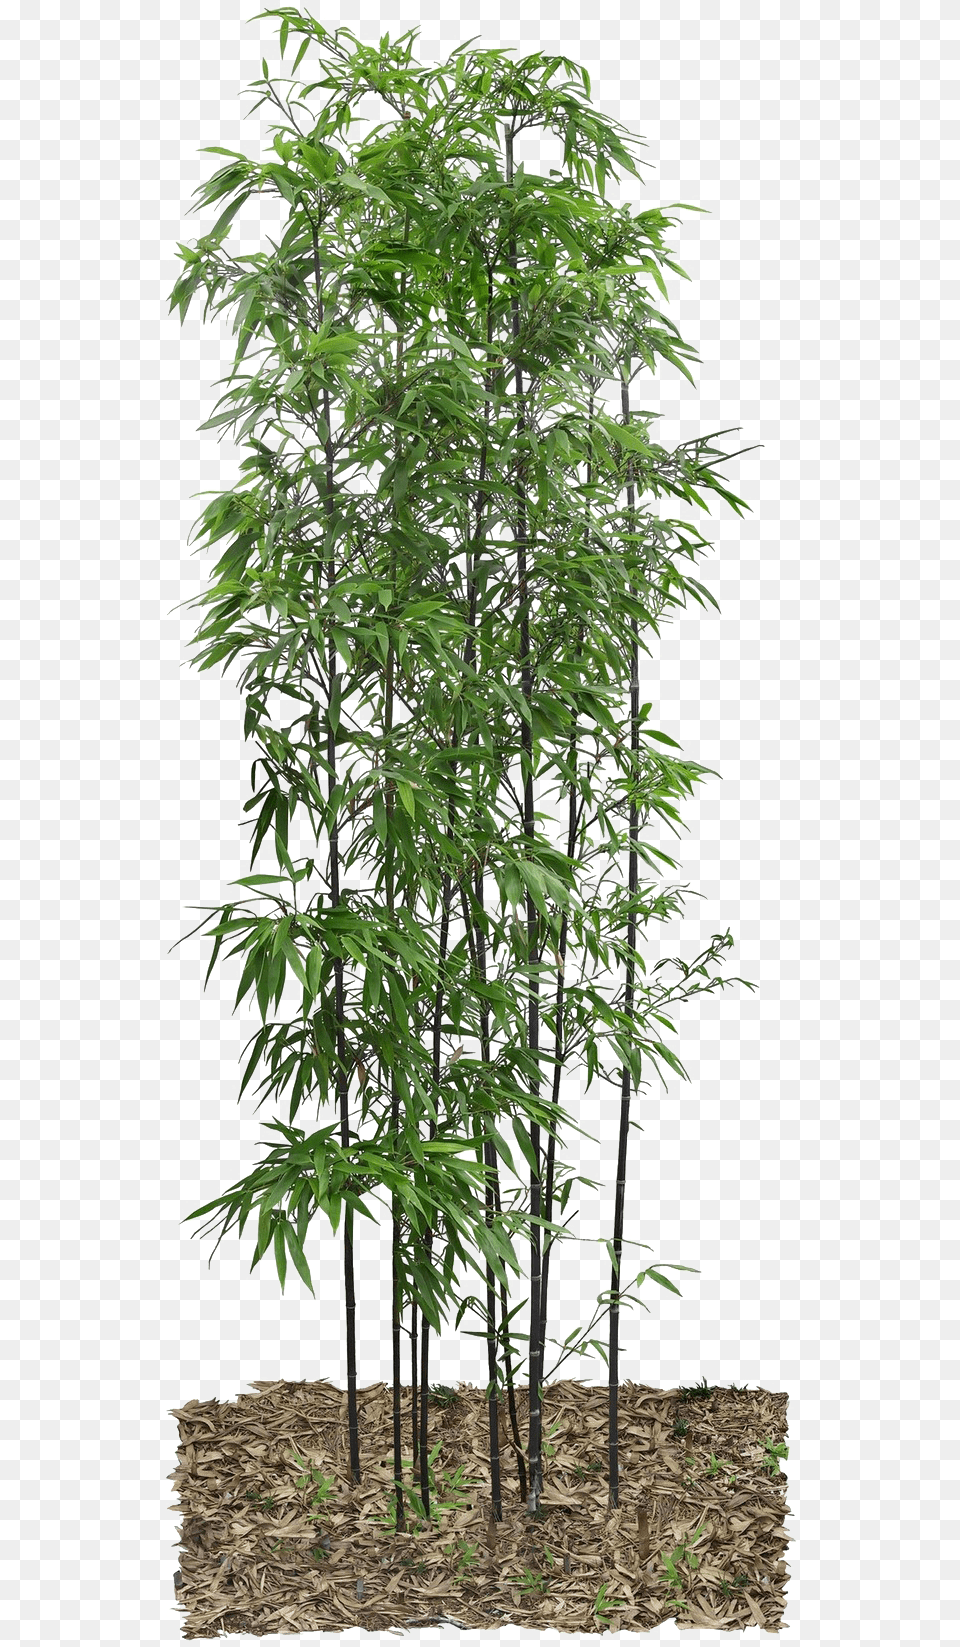 Real Bamboo Tree Transparent Images Bamboo, Plant, Grove, Land, Nature Png